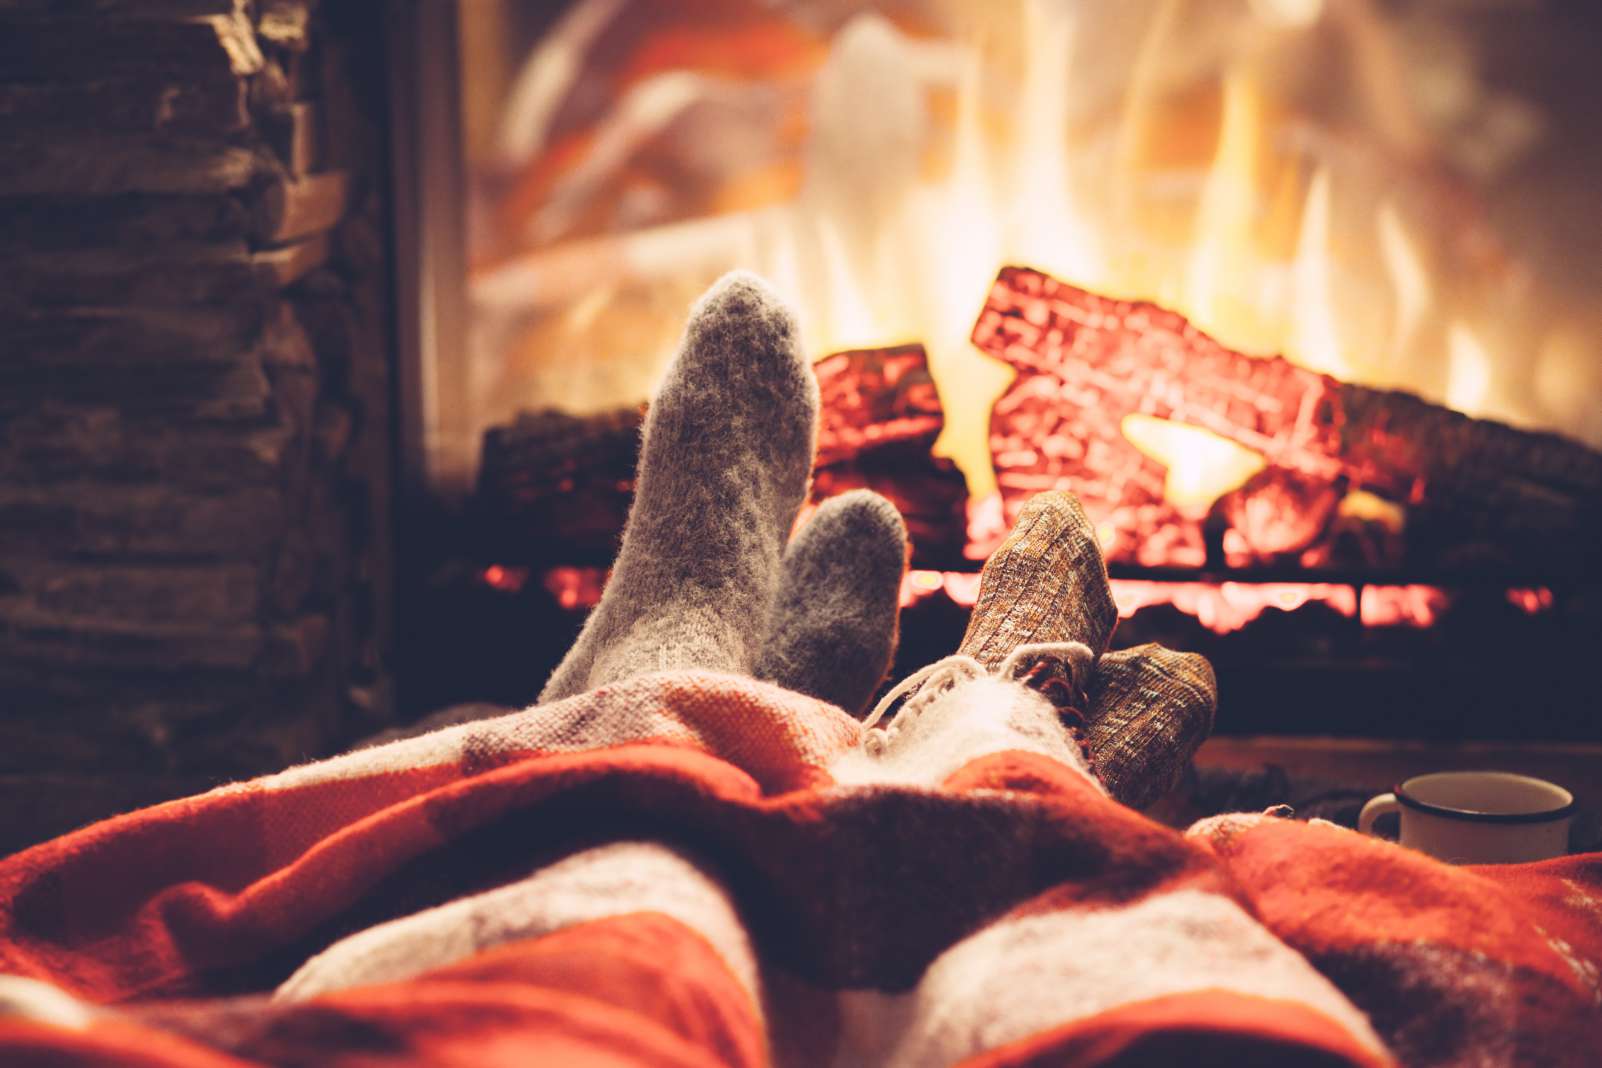 Cold fall or winter evening in Canada. People resting by the fire with blanket and tea. Closeup photo of feet in woolen socks. Cozy scene.